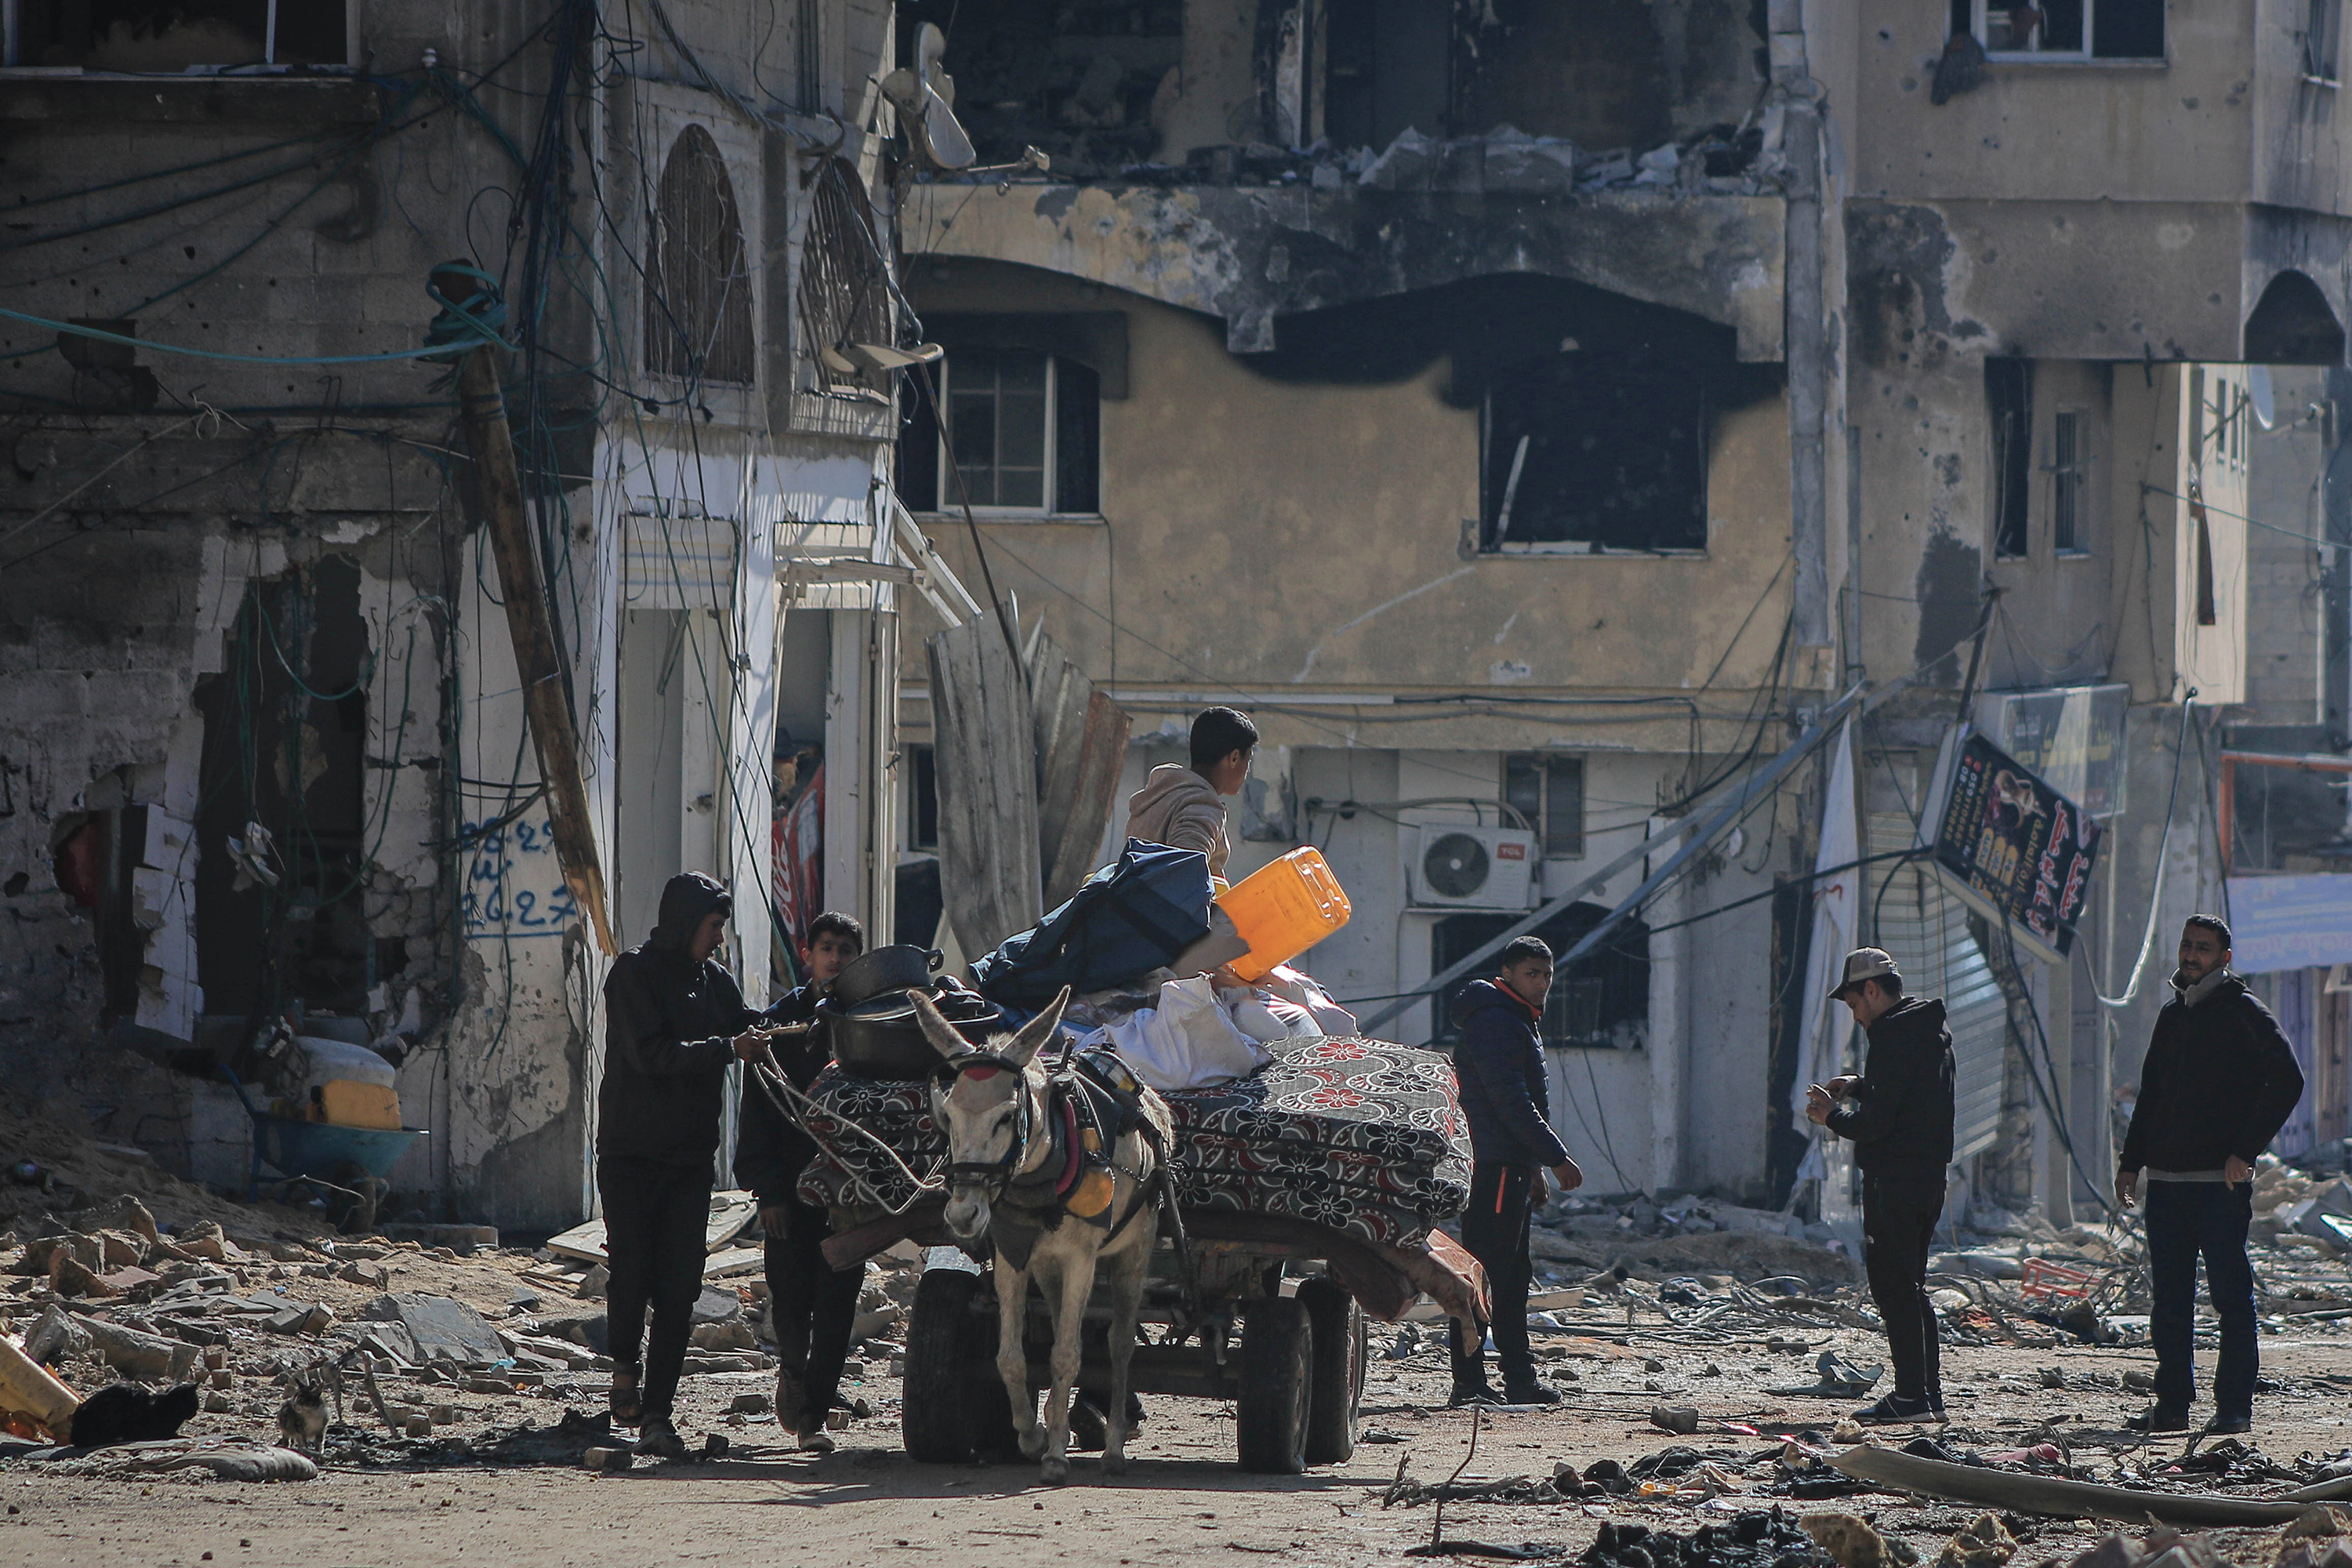 Palestinians with a donkey cart outside destroyed residential buildings in Khan Younis, Gaza, on February 3.